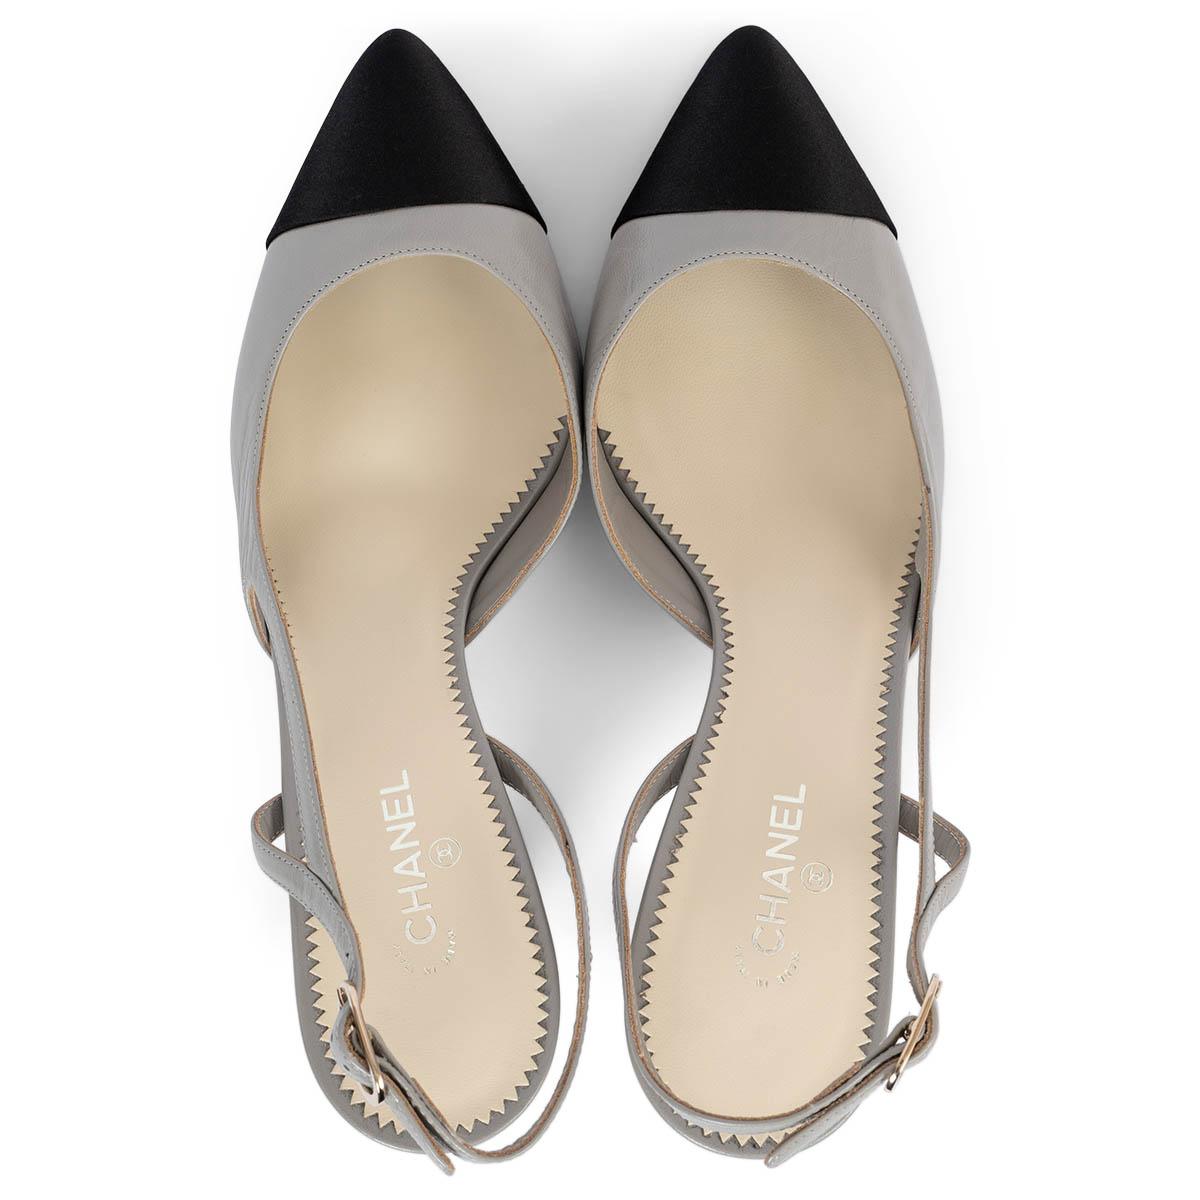 CHANEL grey leather 2013 PEARL HEEL Slingbacks Pumps Shoes 40.5 For Sale 2